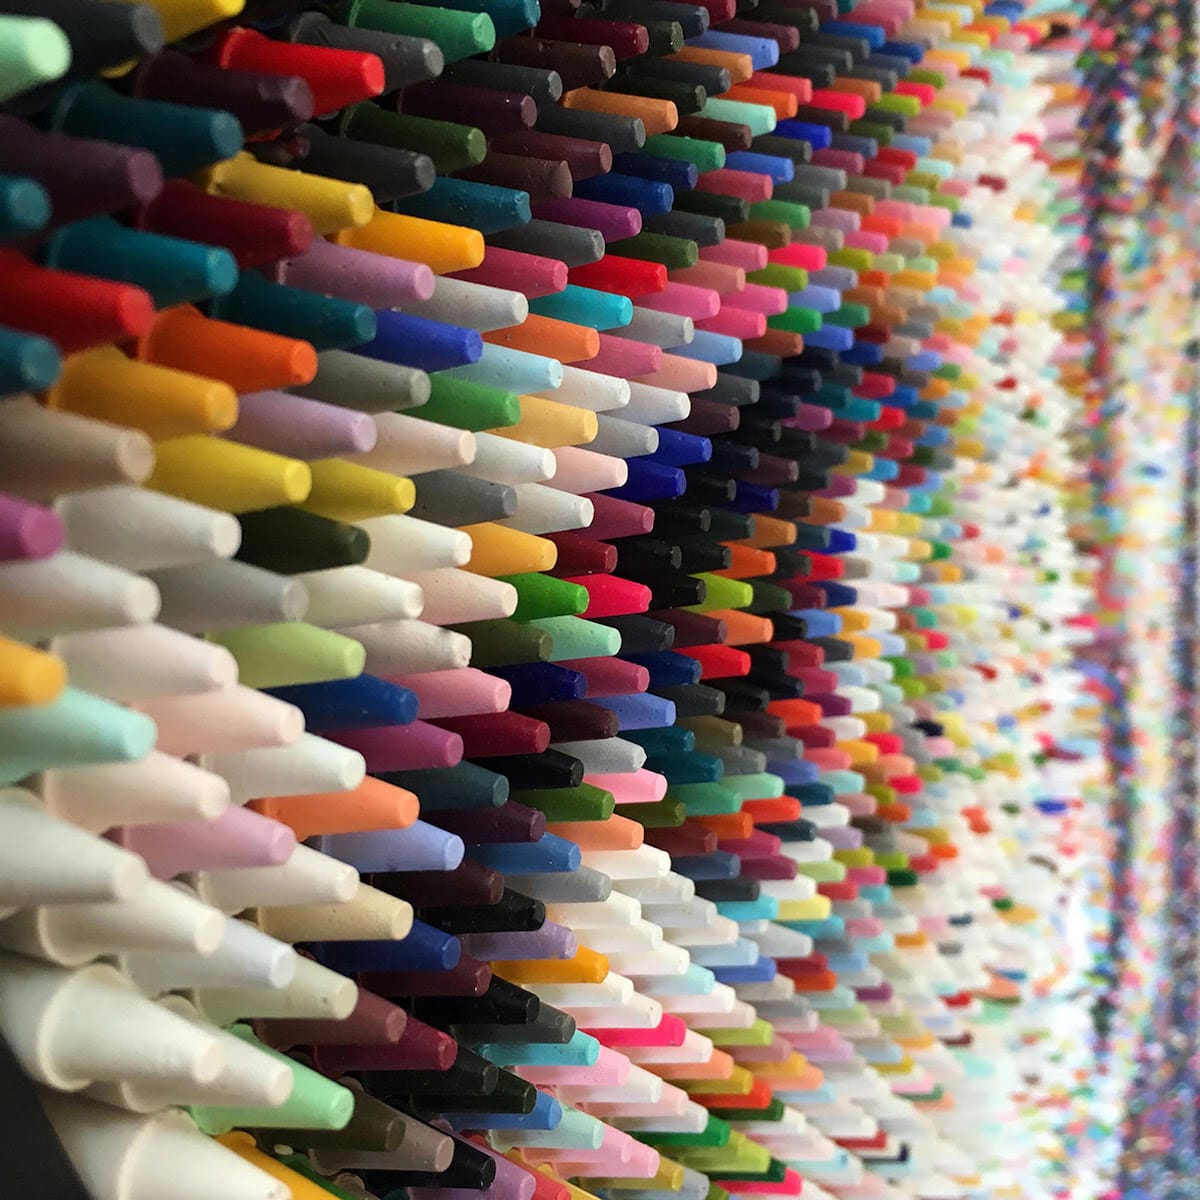 An example of Art Materialism - a close up of countless stacked crayons that look like a portrait of a face from a distance by artist Christian Faur